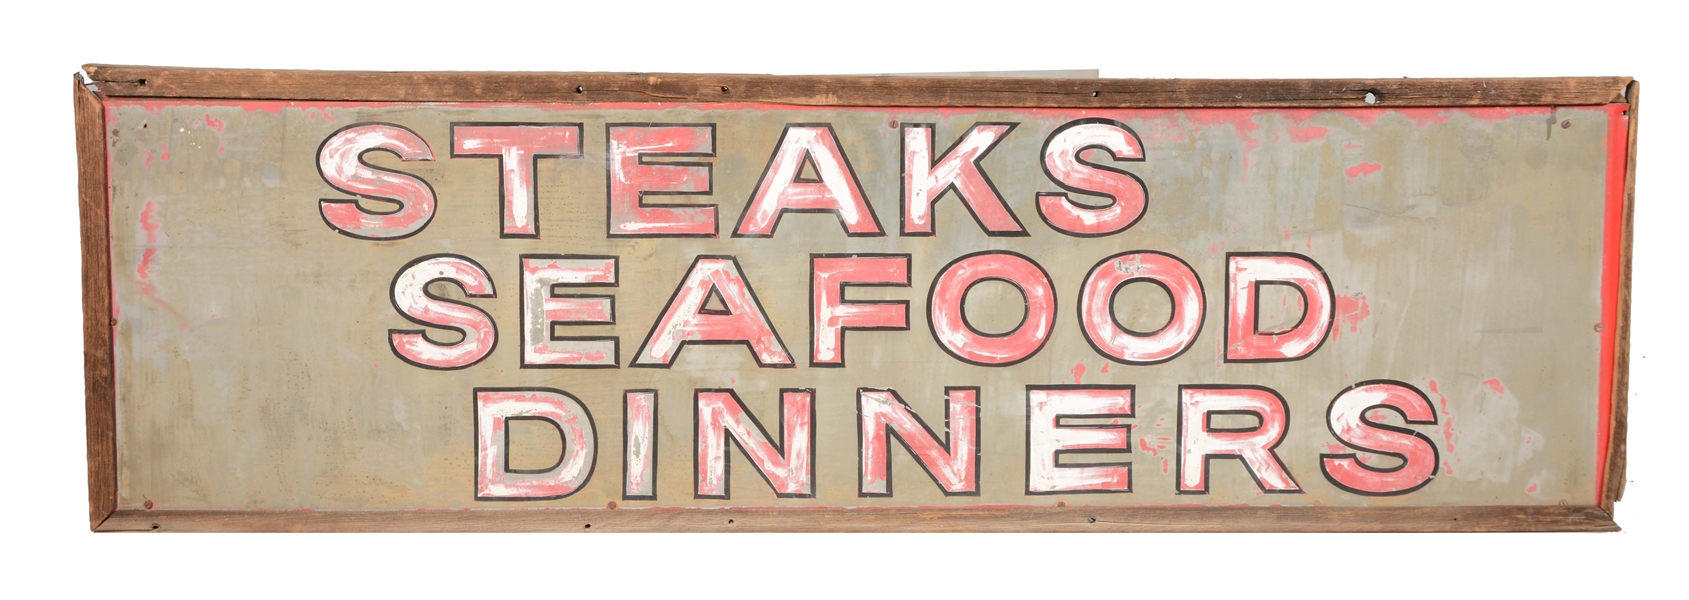 "STEAKS SEAFOOD DINNERS" DINER SIGN. 